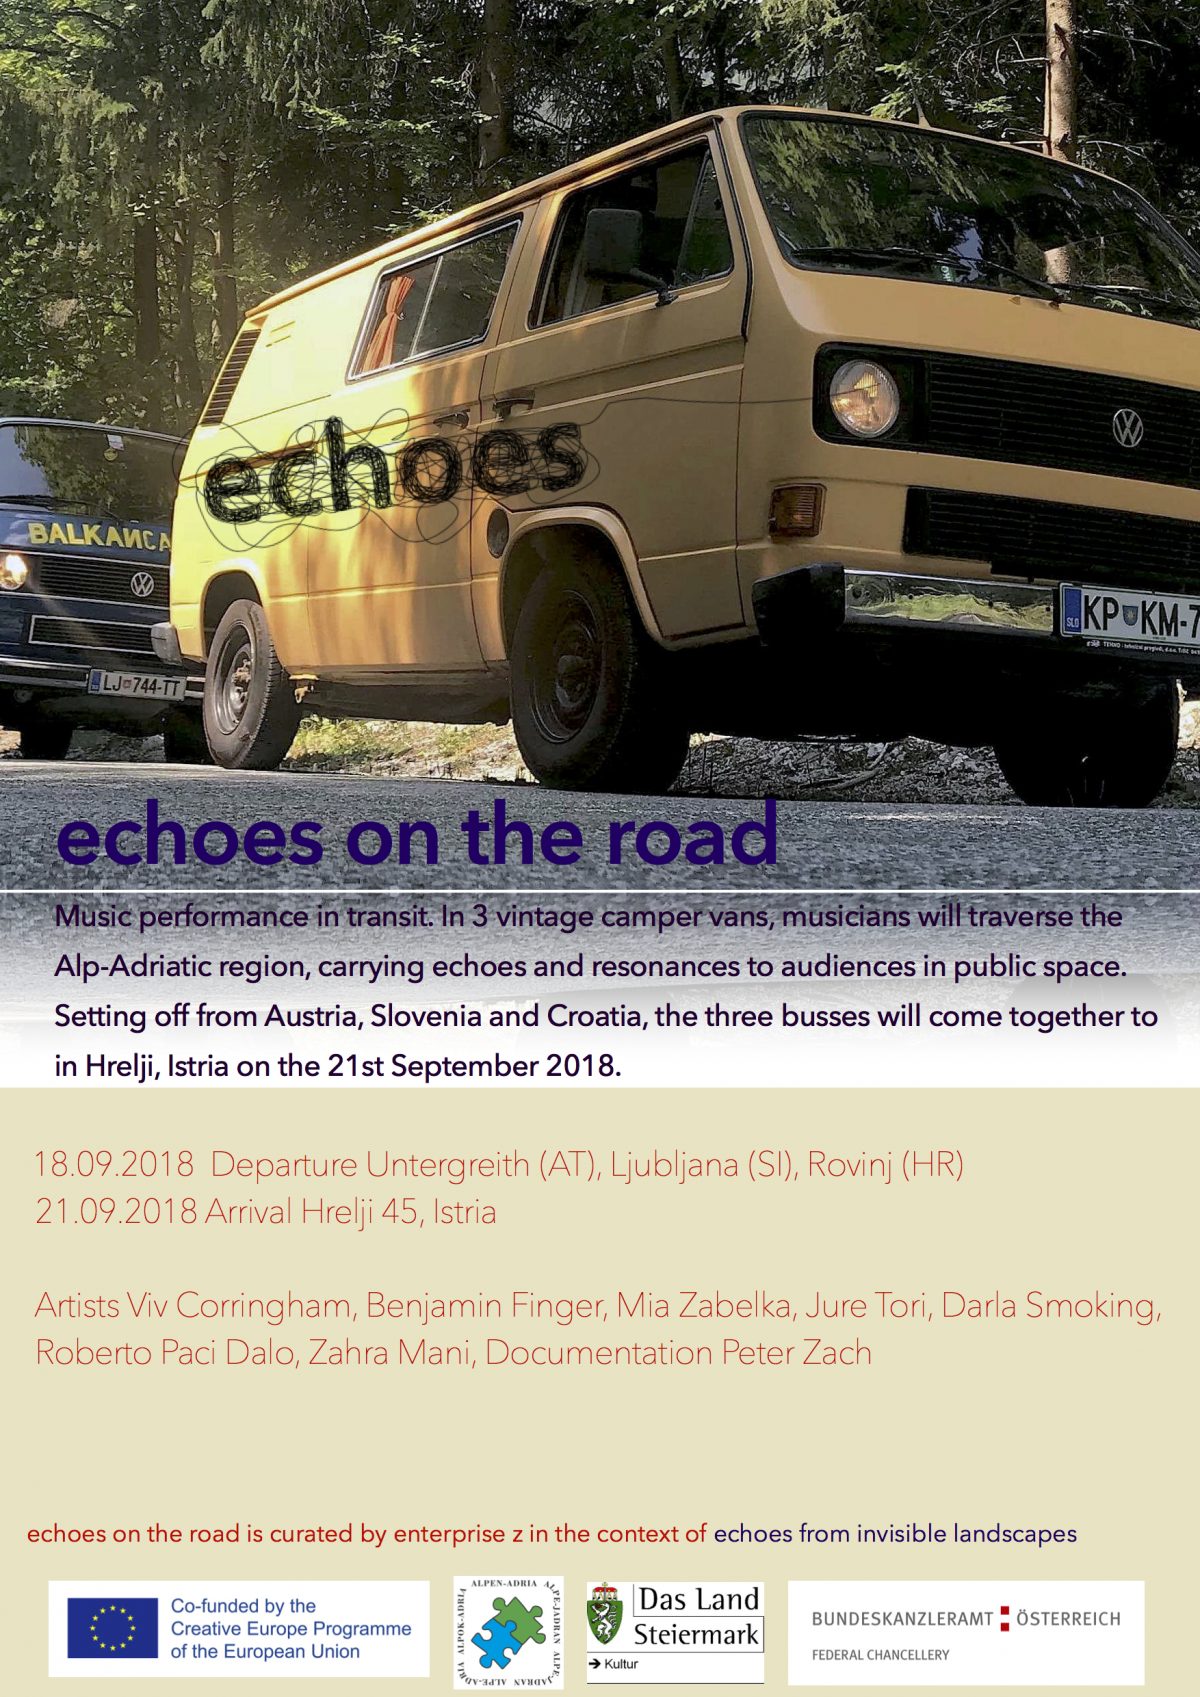 Echoes on the Road 18th – 21st September 2018